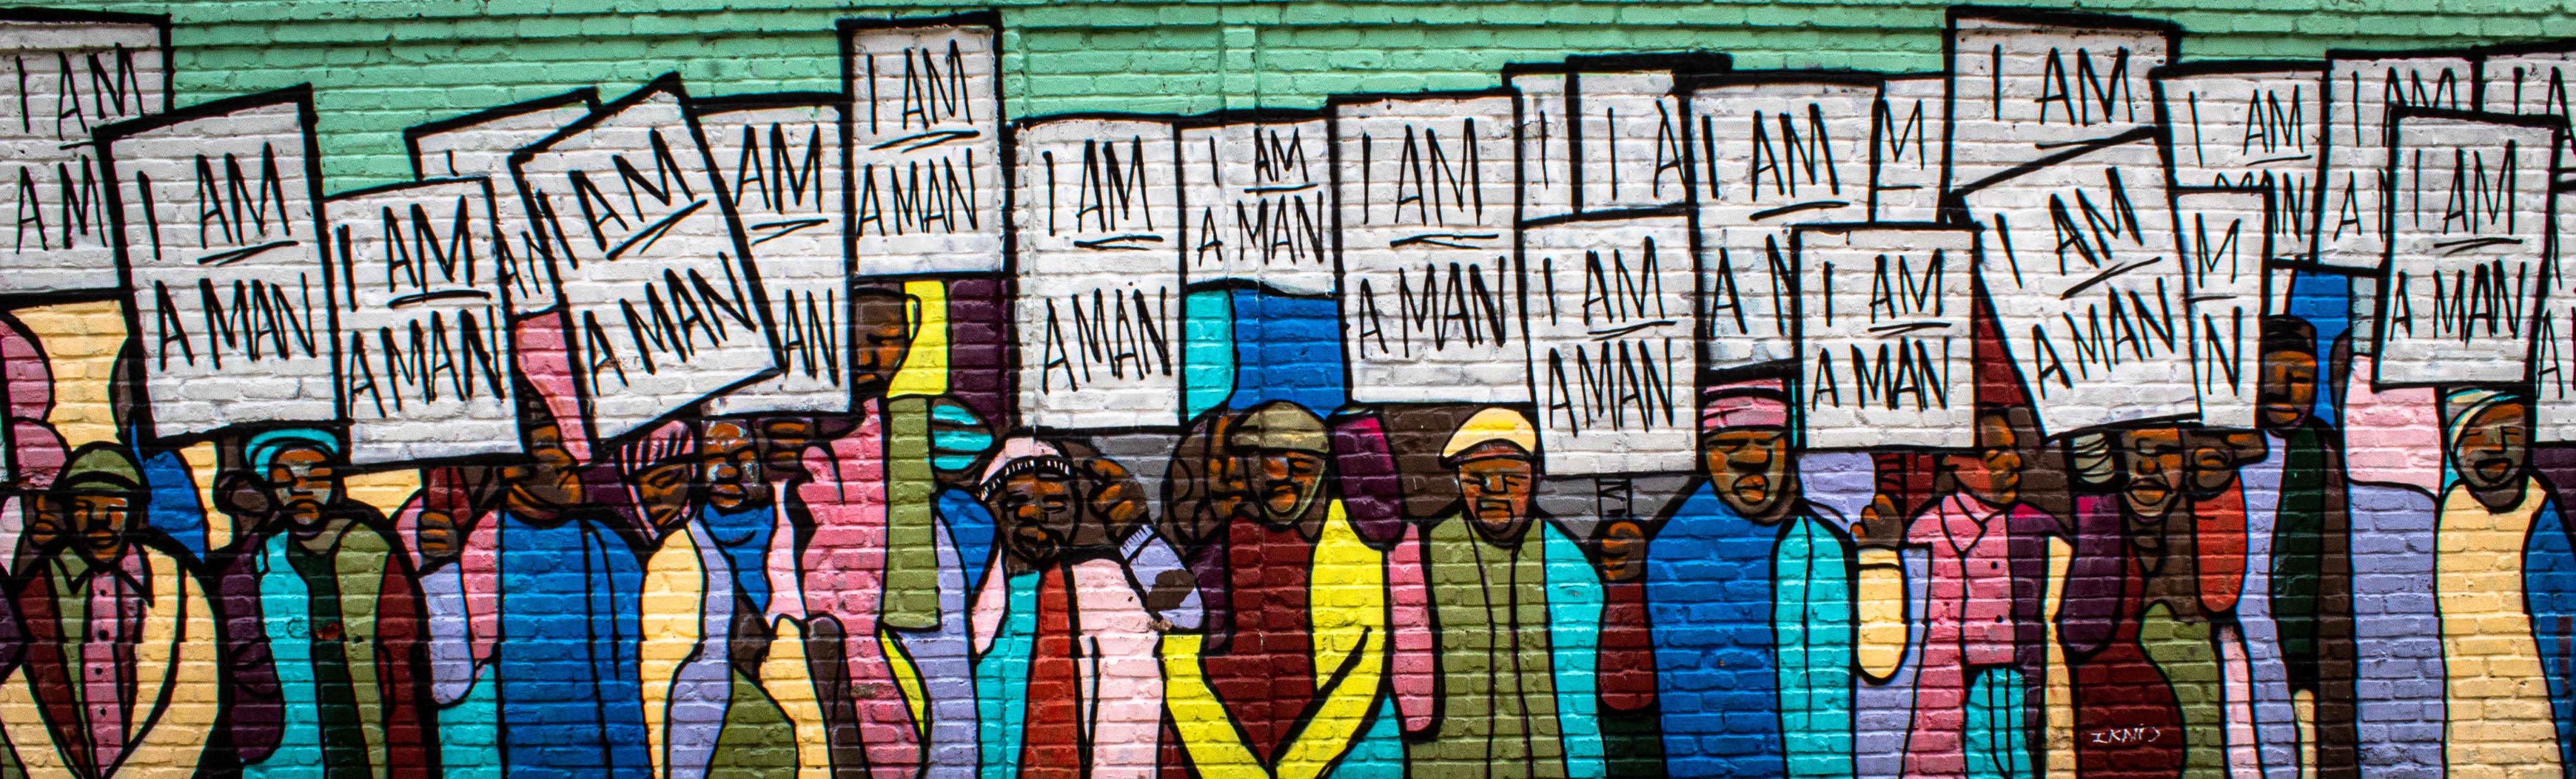 civil rights mural that reads I Am A Man